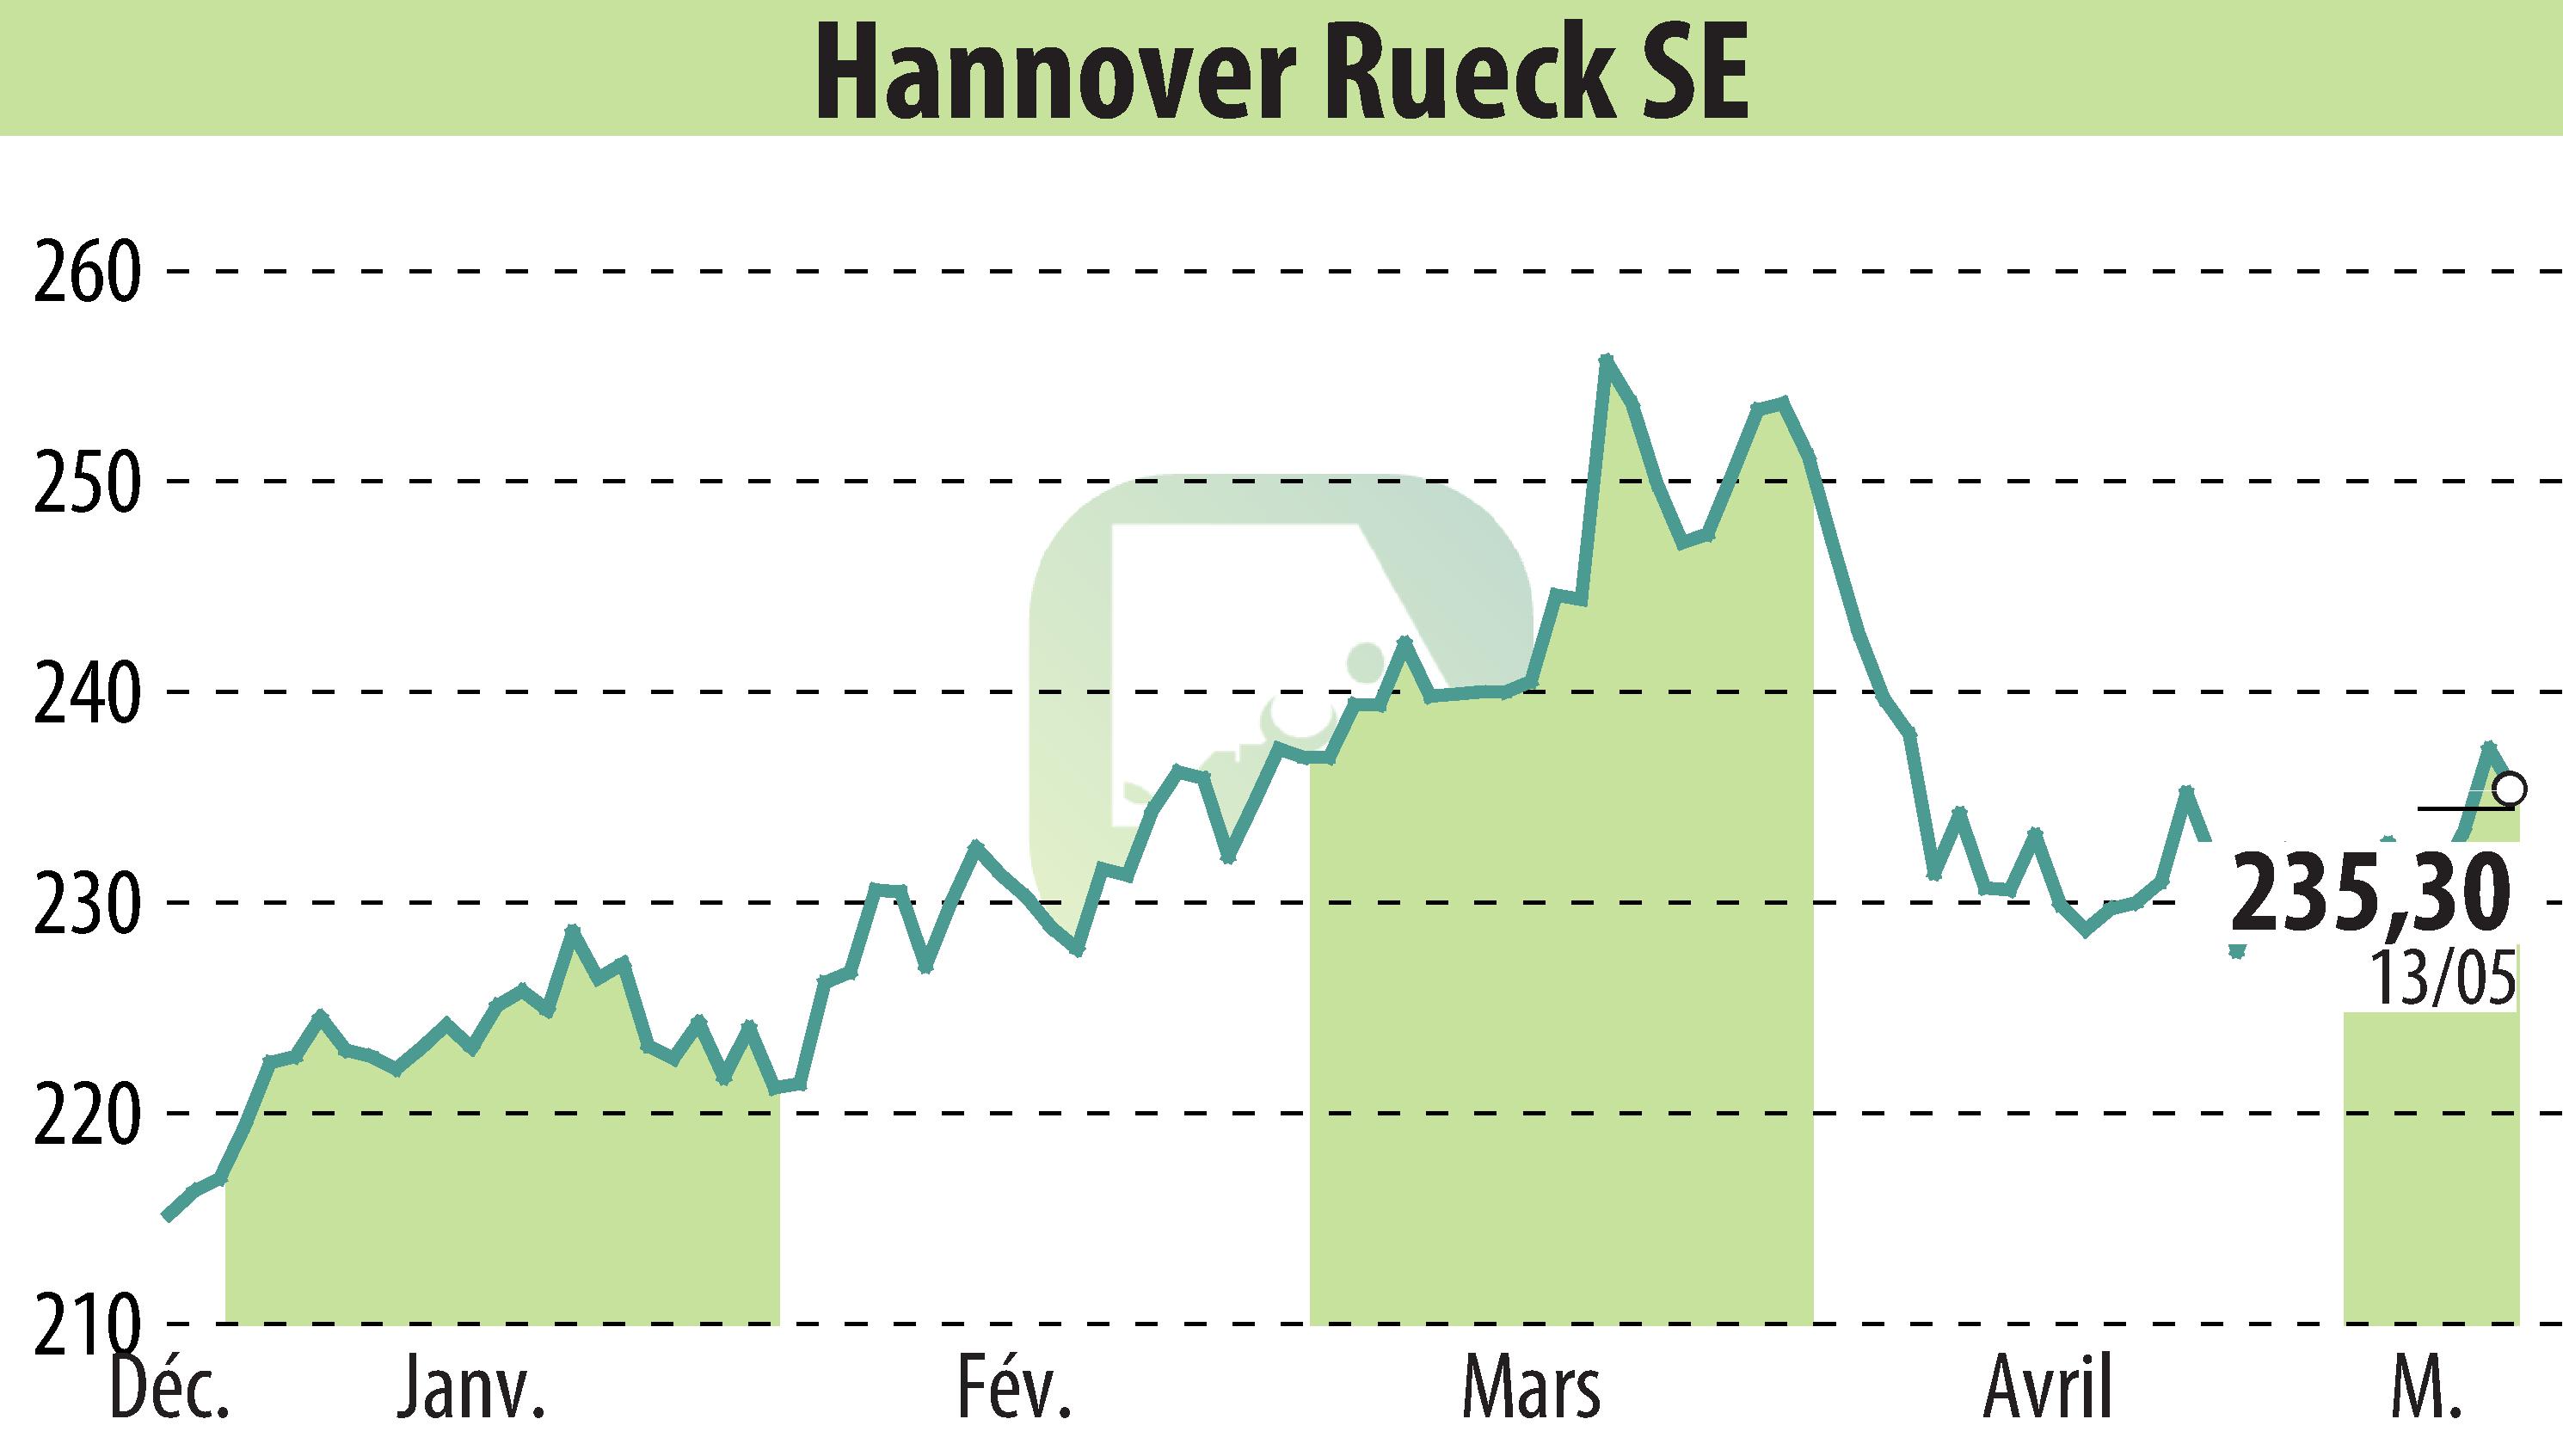 Stock price chart of Hannover Rück SE (EBR:HNR1) showing fluctuations.